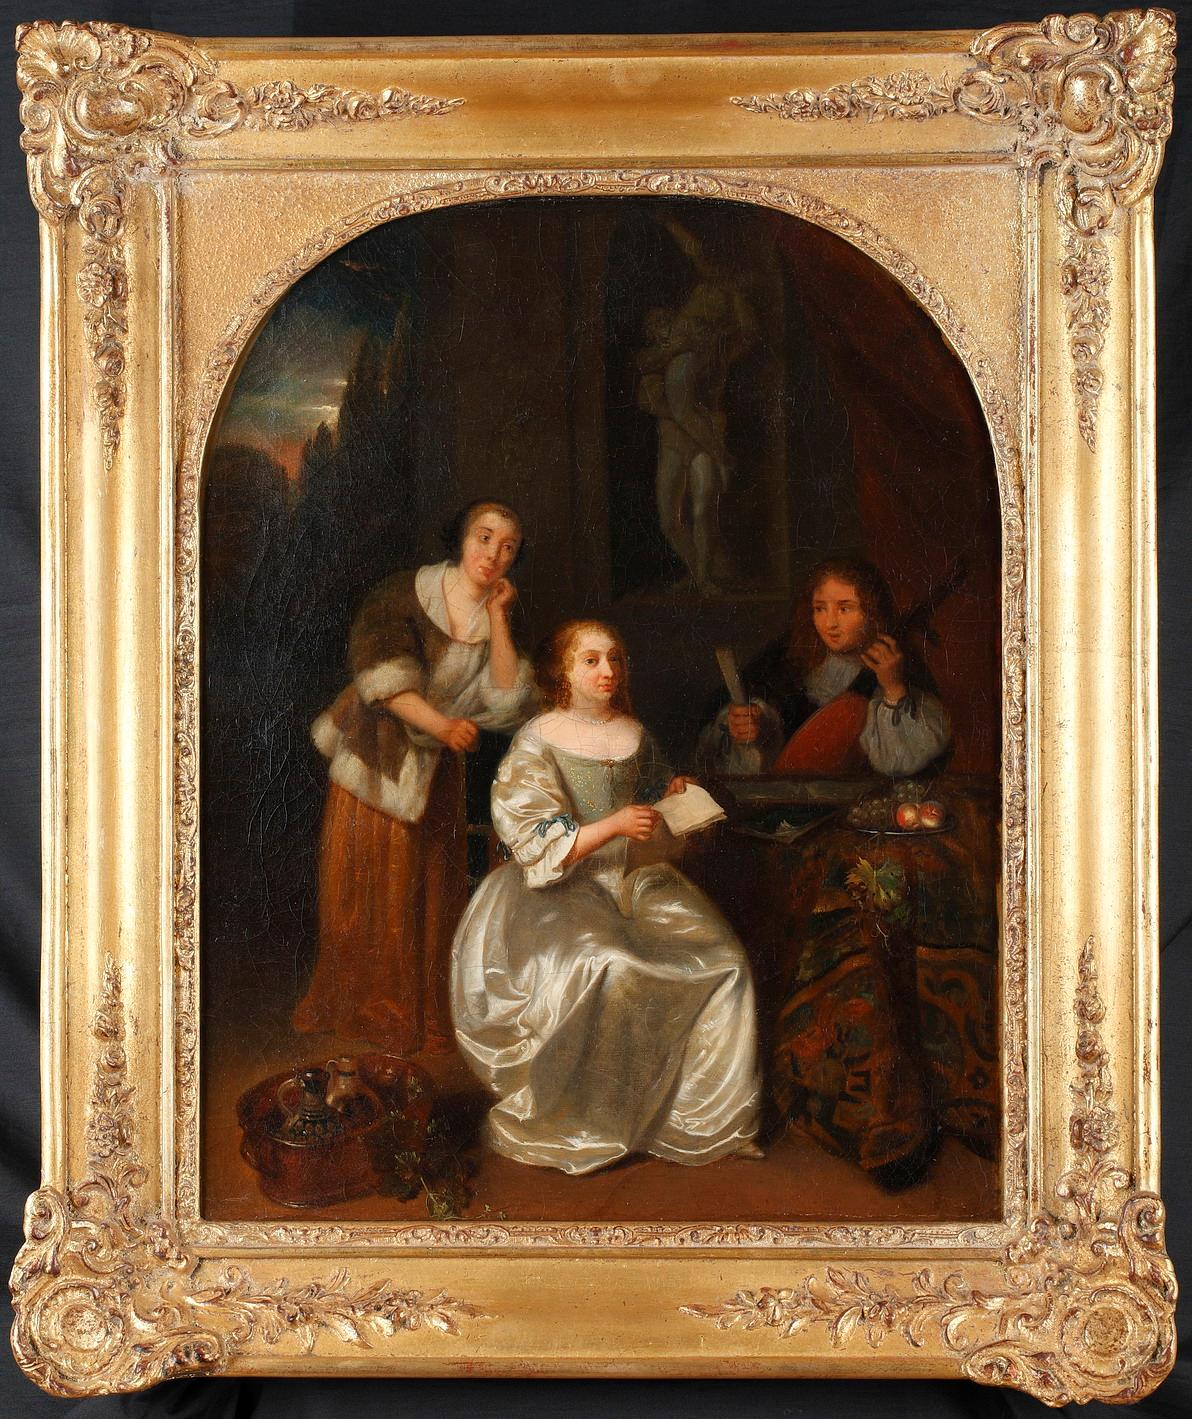 Charming pair of paintings representing young women in well-off interiors during their music lesson, one illustrating a singing lesson and the other a Cello lesson.

The theme of the music lesson, abundantly represented since the 17th century in